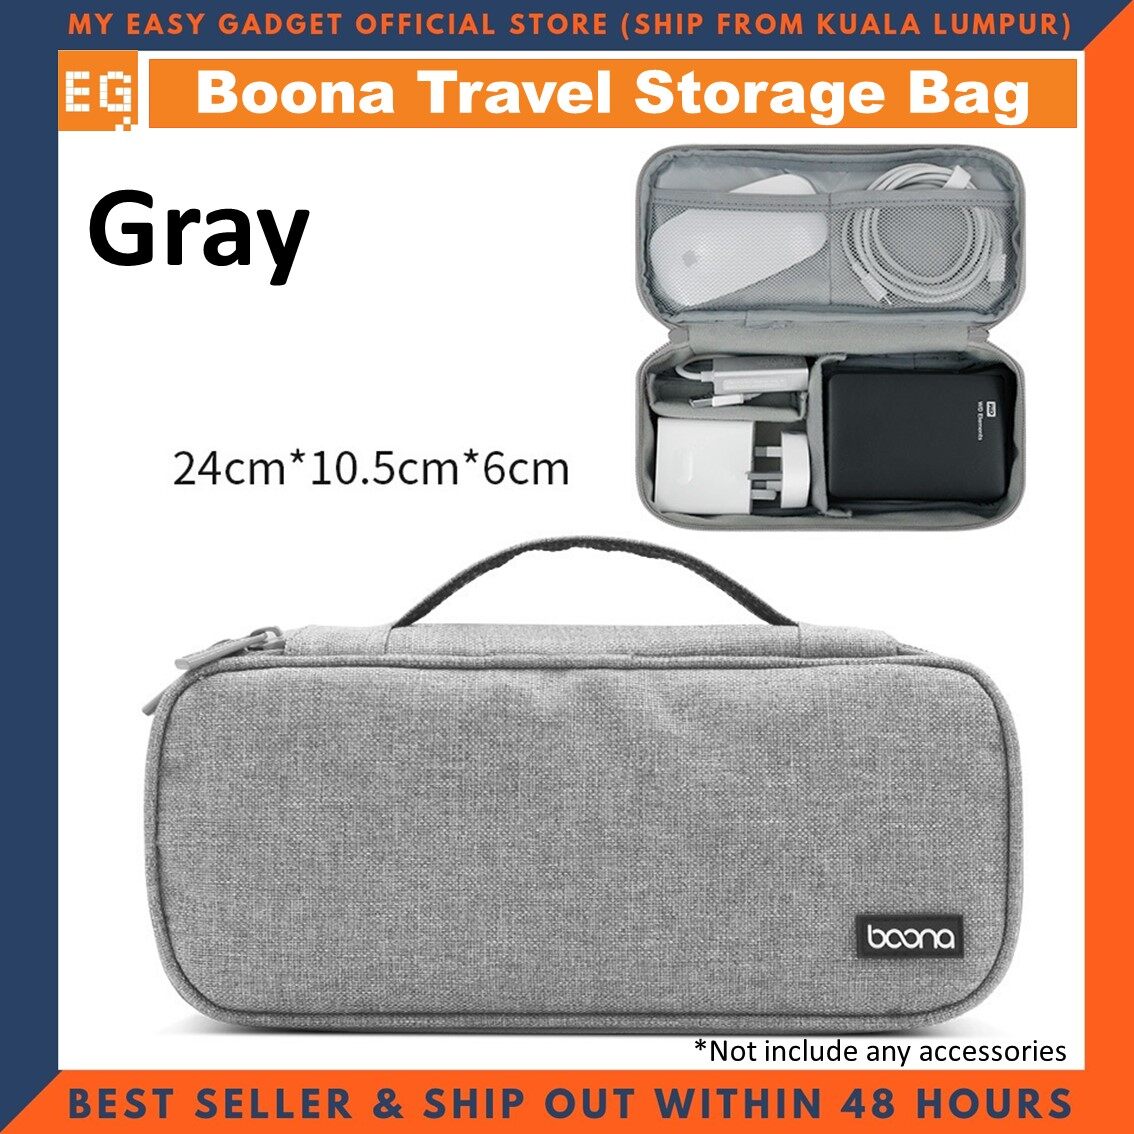 Boona Storage Bag Laptop Charger Bag Cable organizer External Hard Disk Case (Fit Power Bank, Mouse, Adapter)